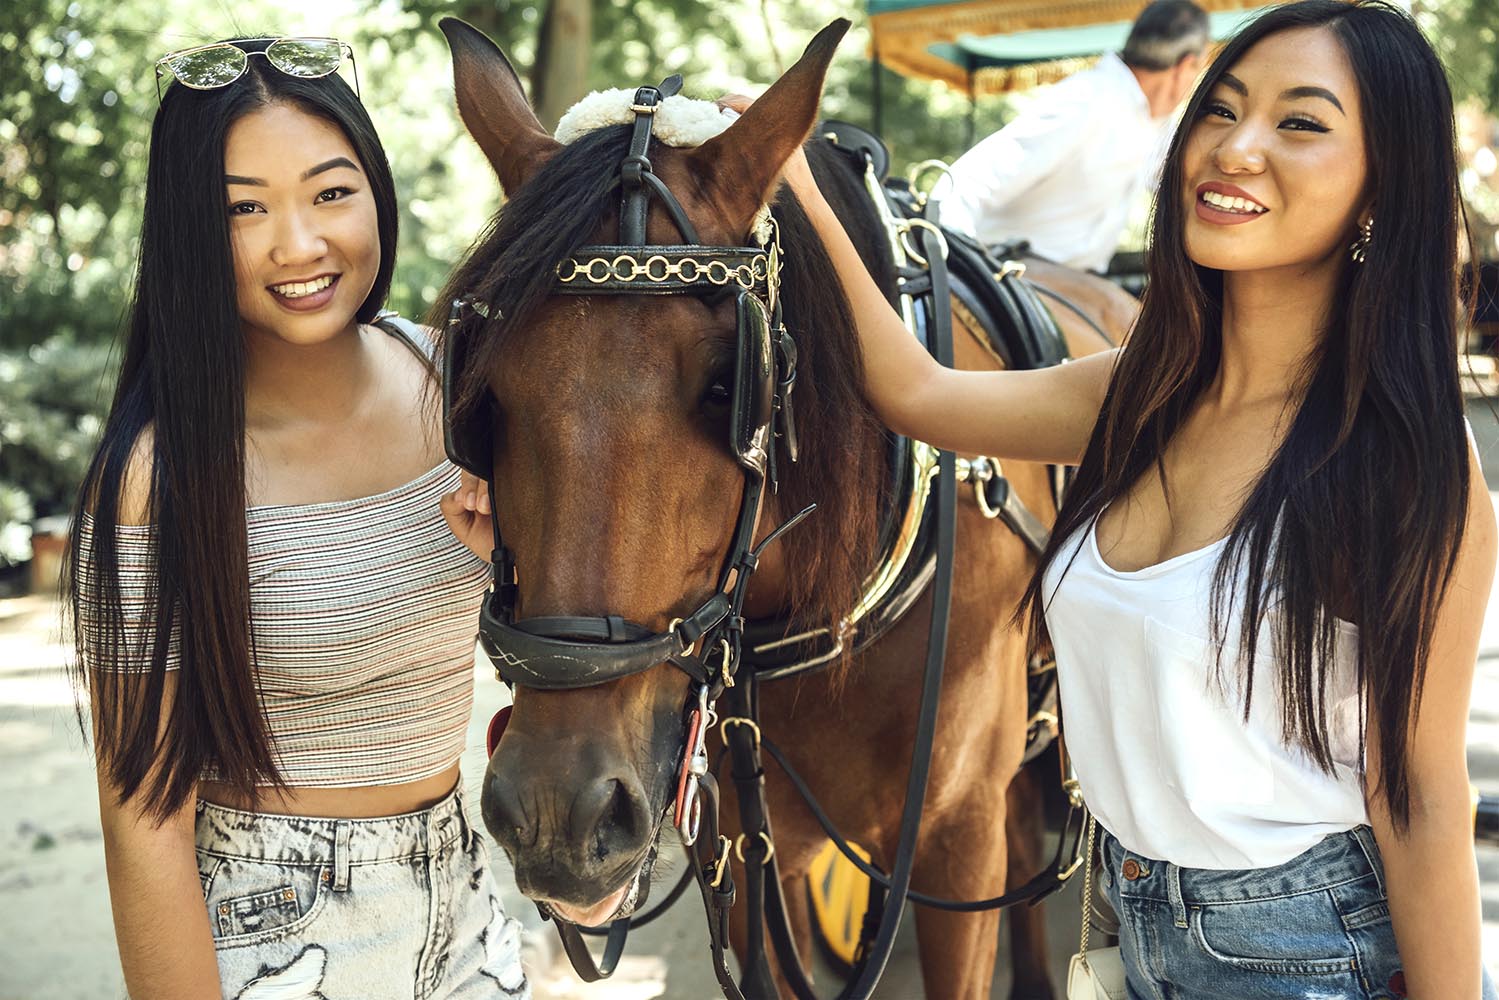 Chinese girls posing with horse